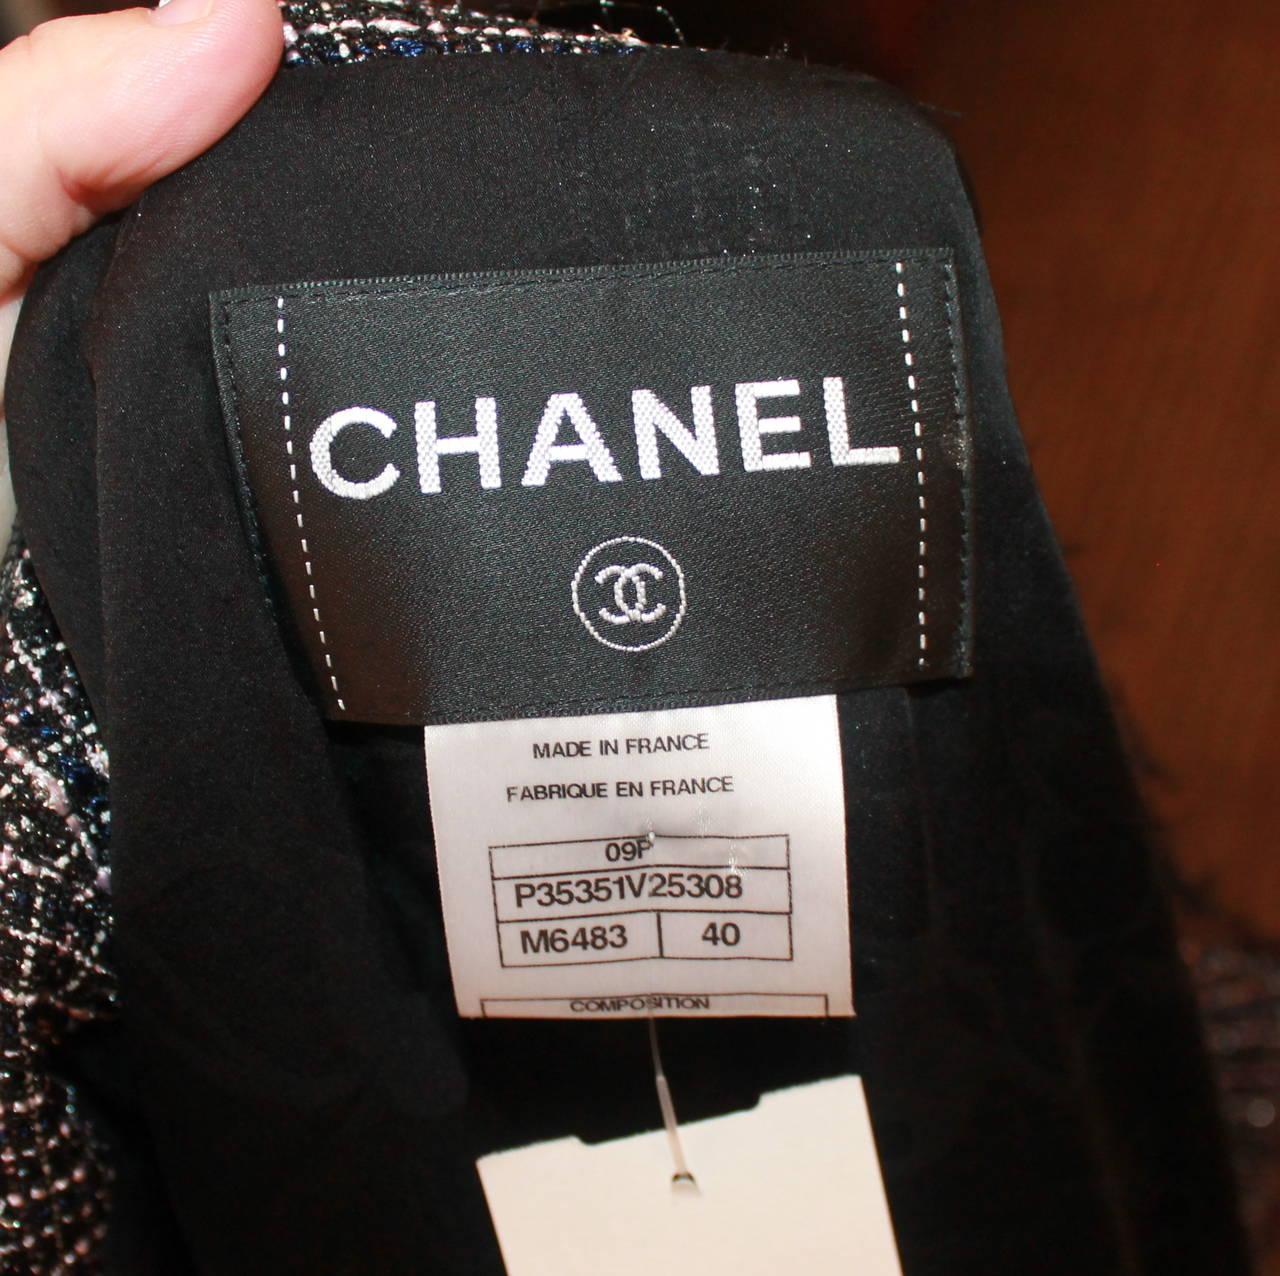 Chanel 2009 Black, White, Pink Tweed Jacket with Patent Detail - 40 4